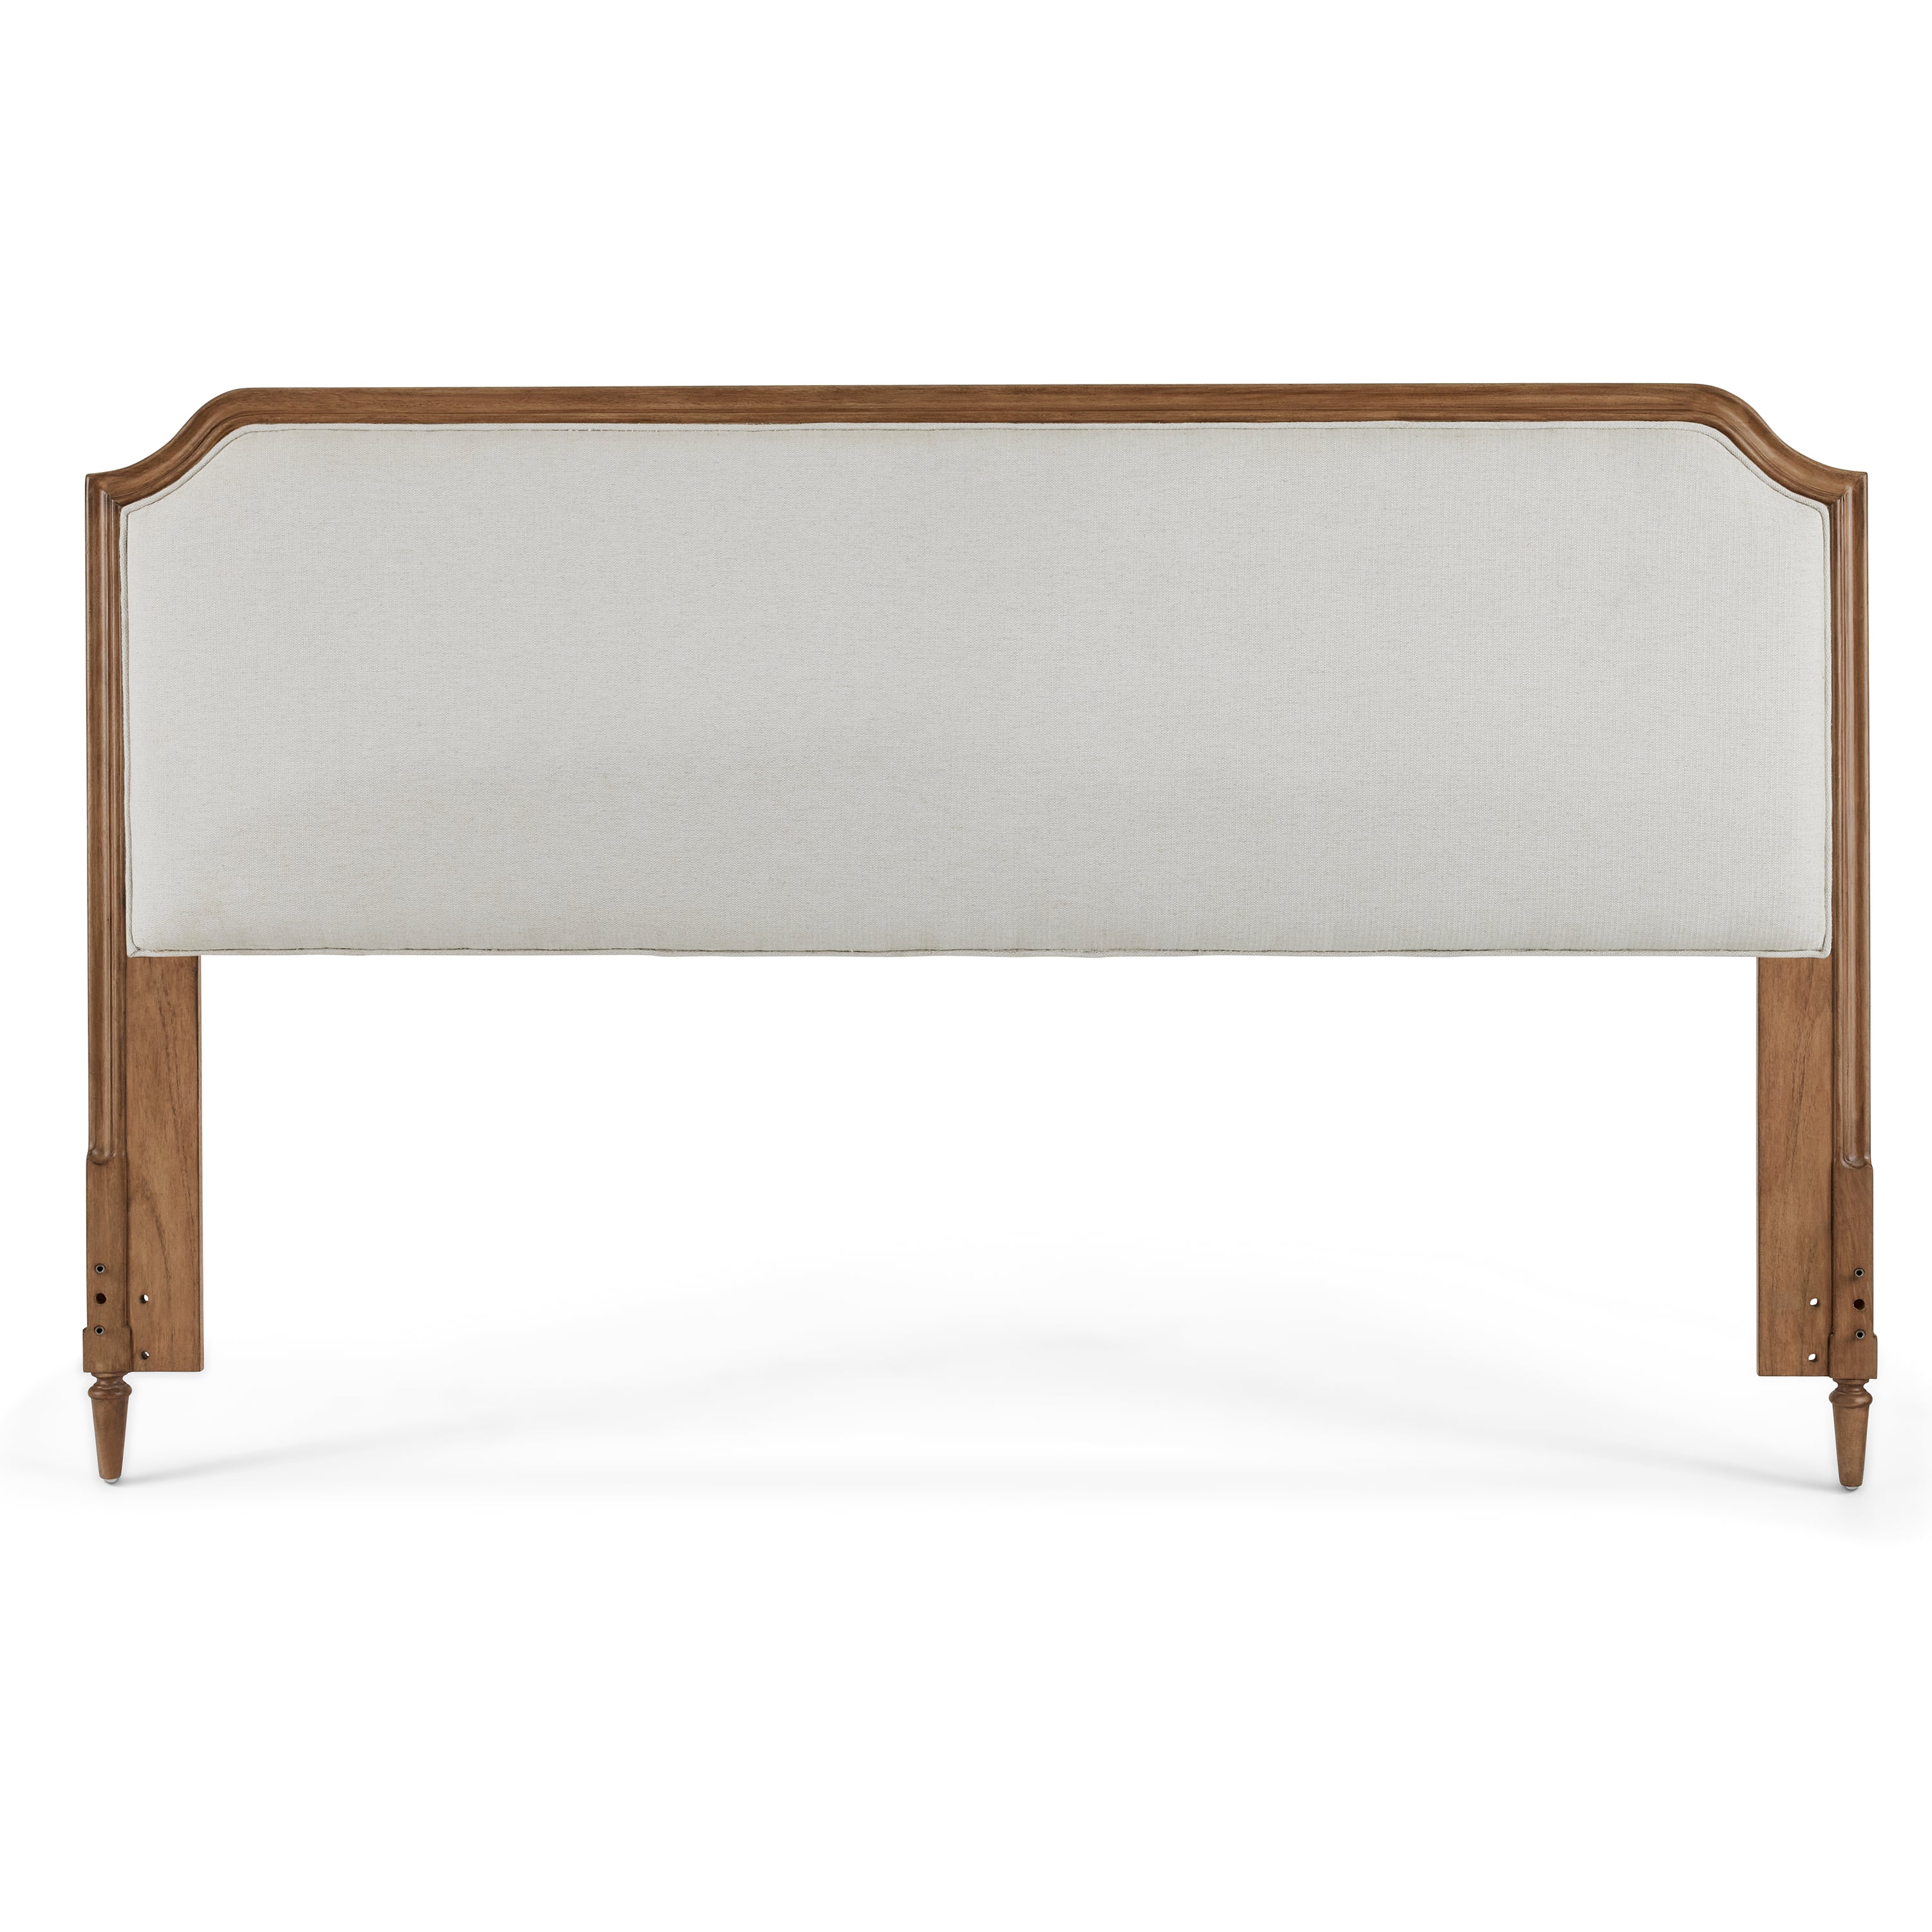 Corinne Upholstered Headboard Items range from $749.00 to $799.00